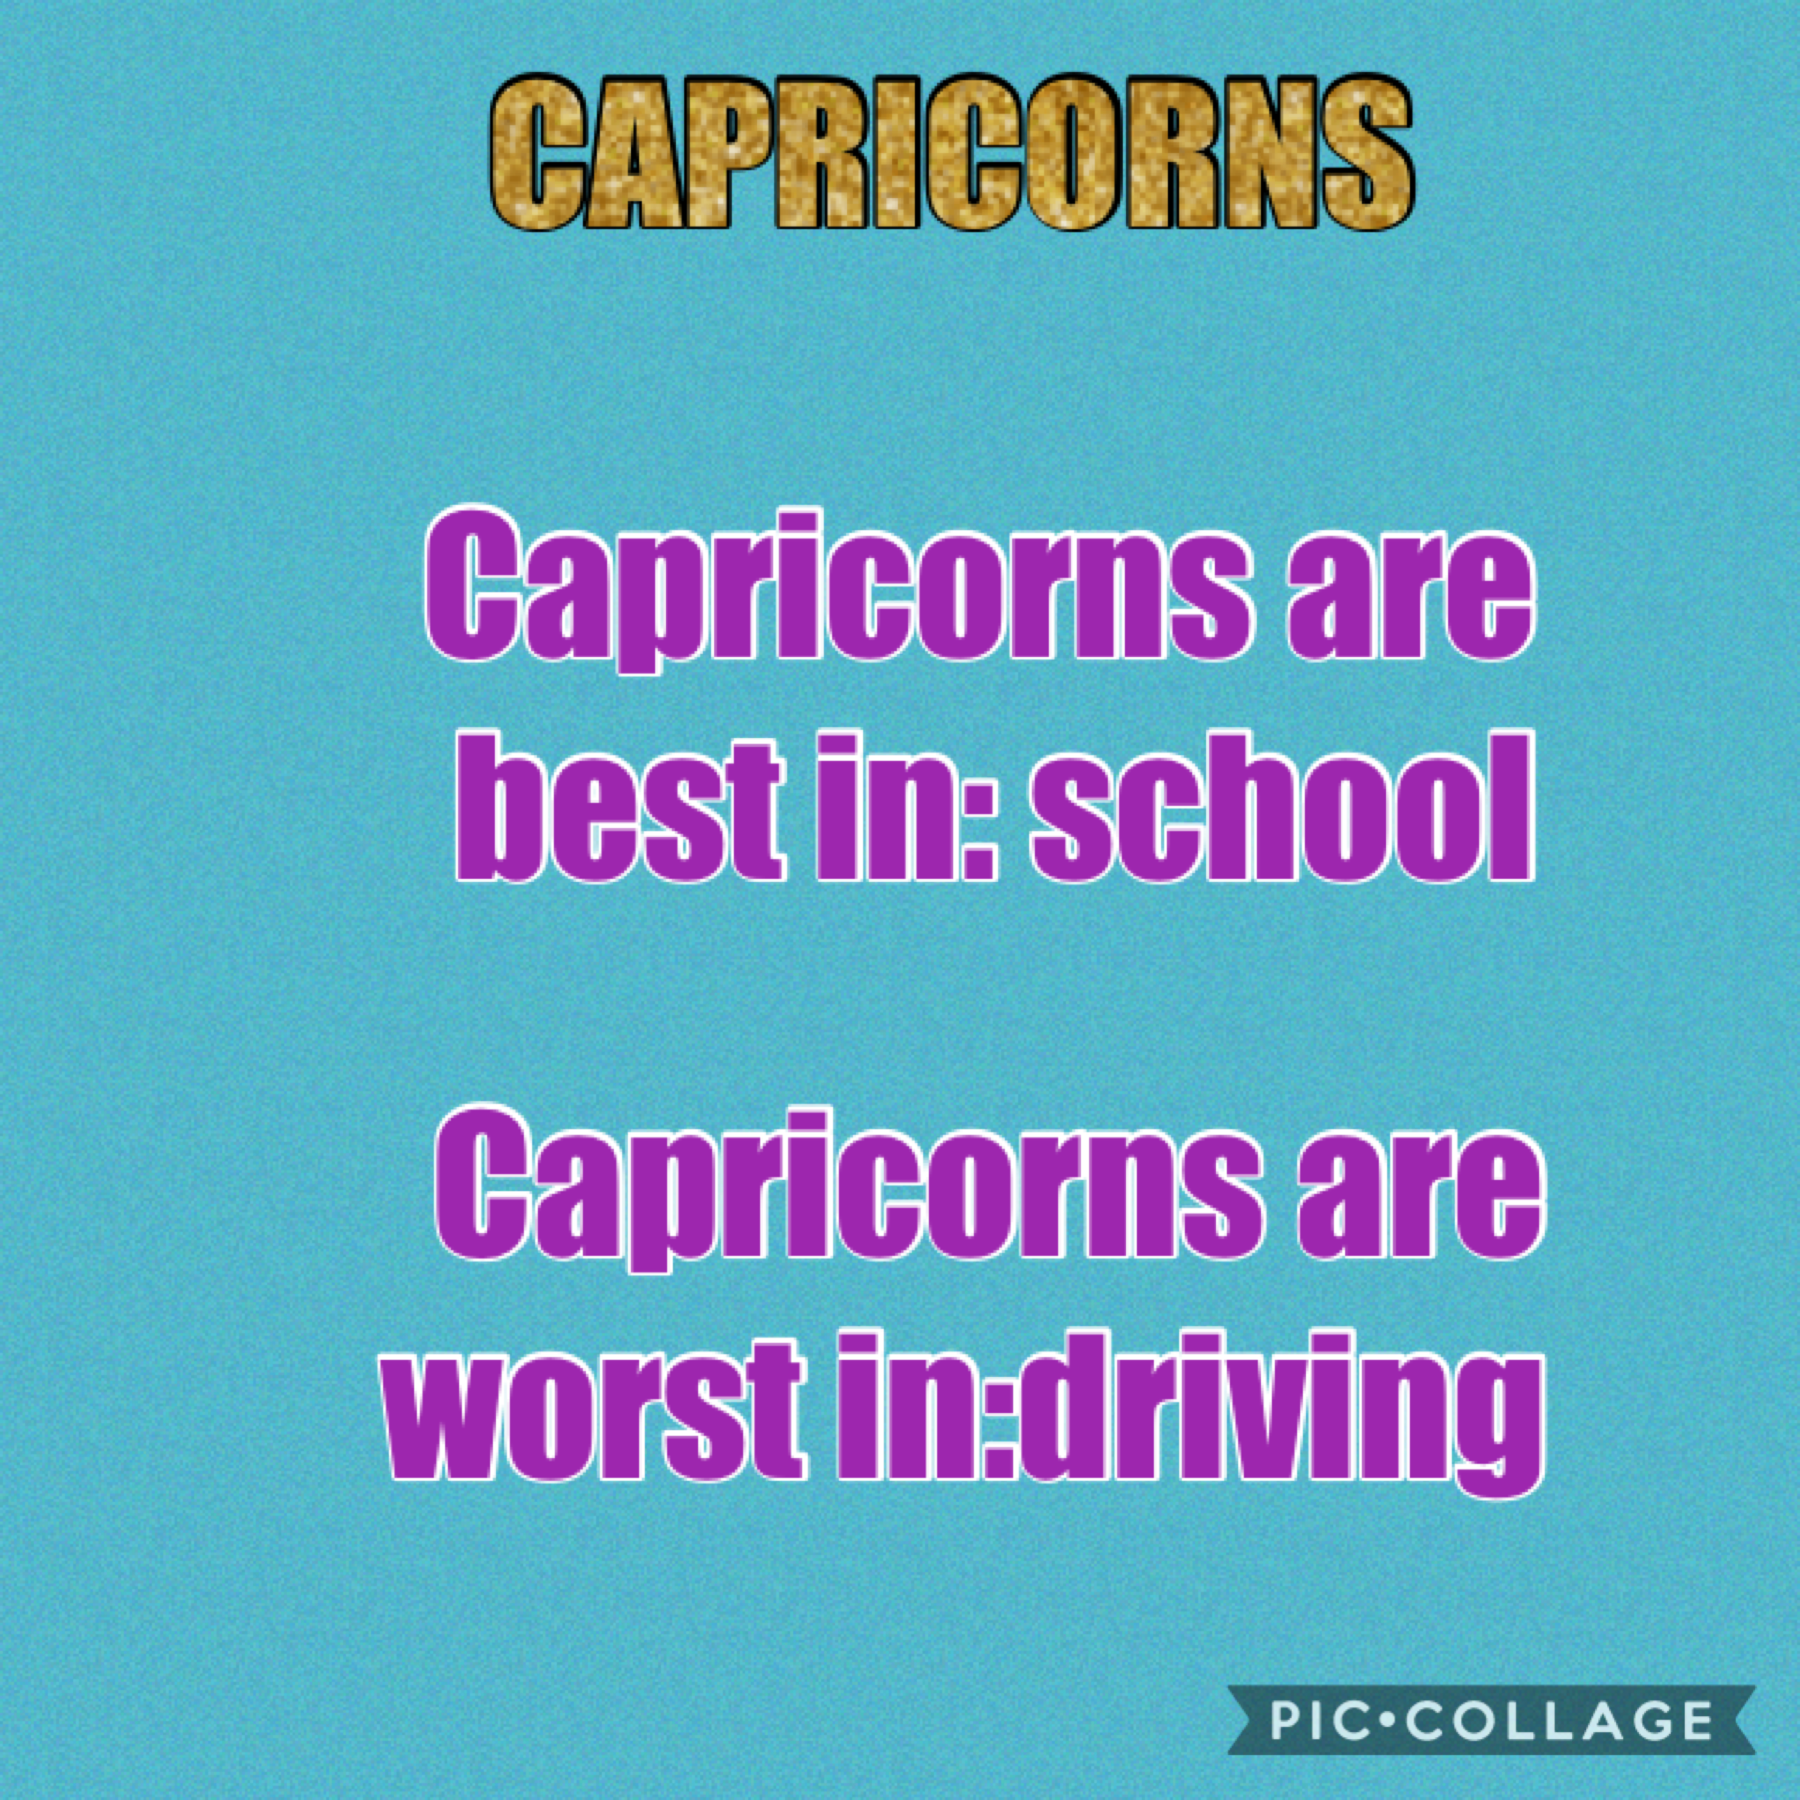 I am a Capricorn and I want to tell you about capricorns